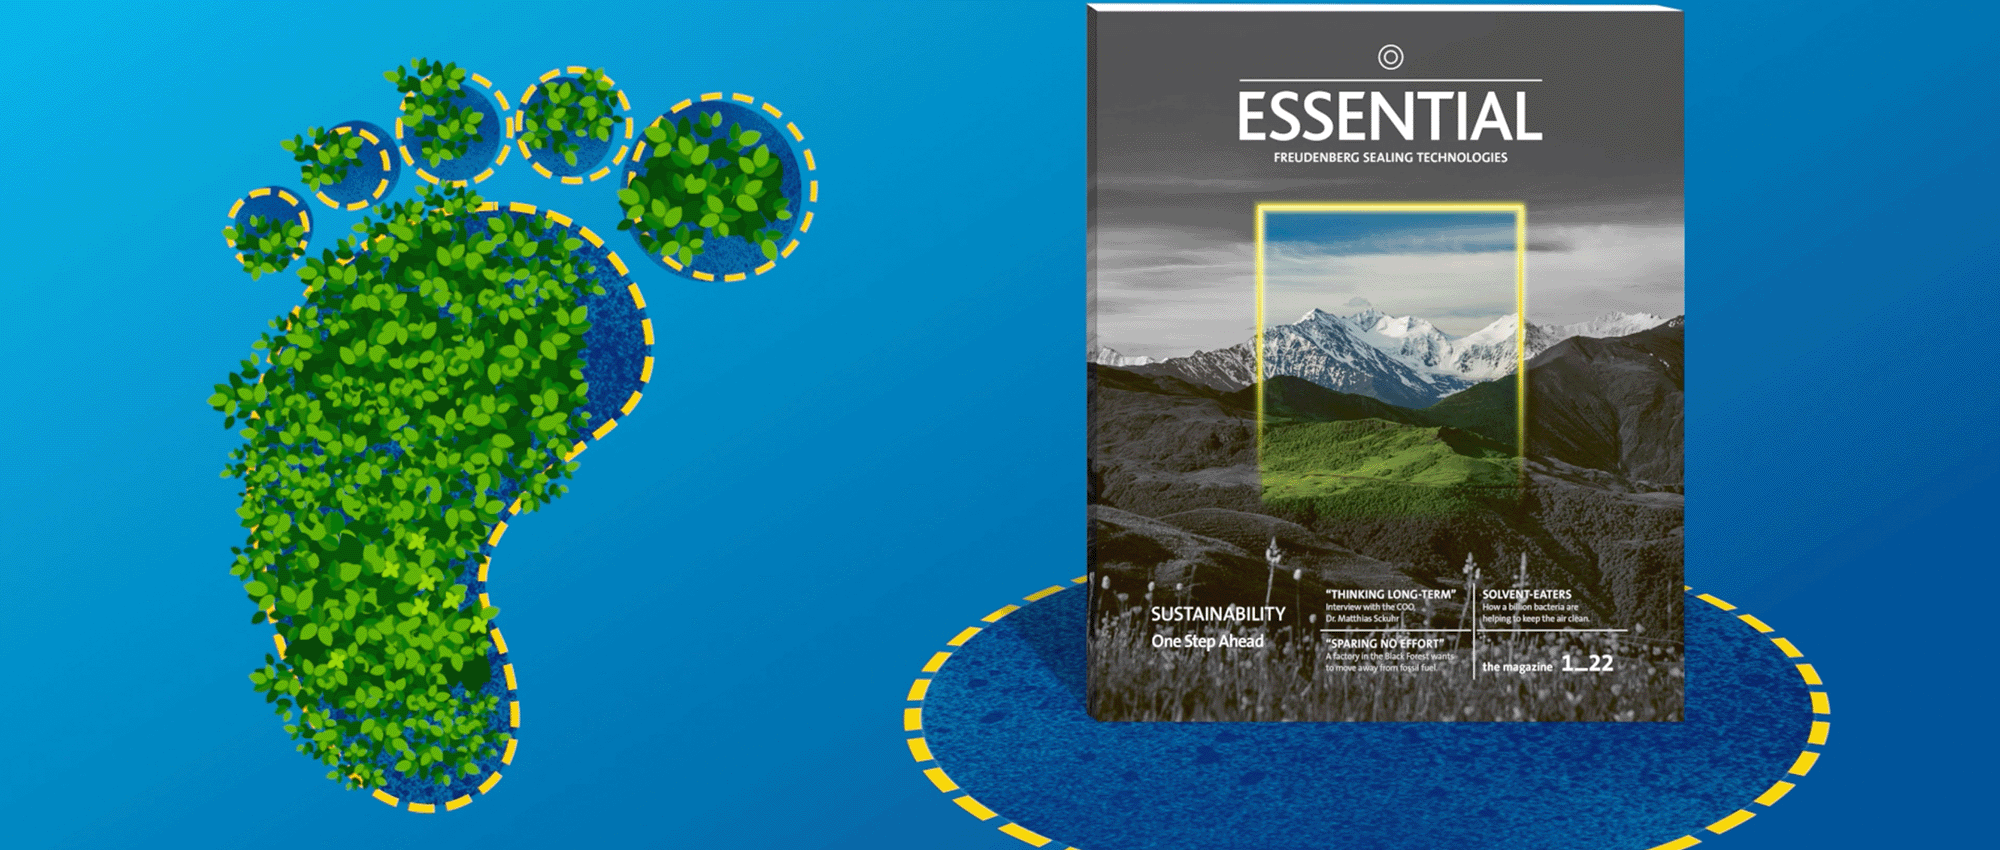 On the left is an illustration of plants in the form of a footprint and to the right is Essential magazine against a blue background.